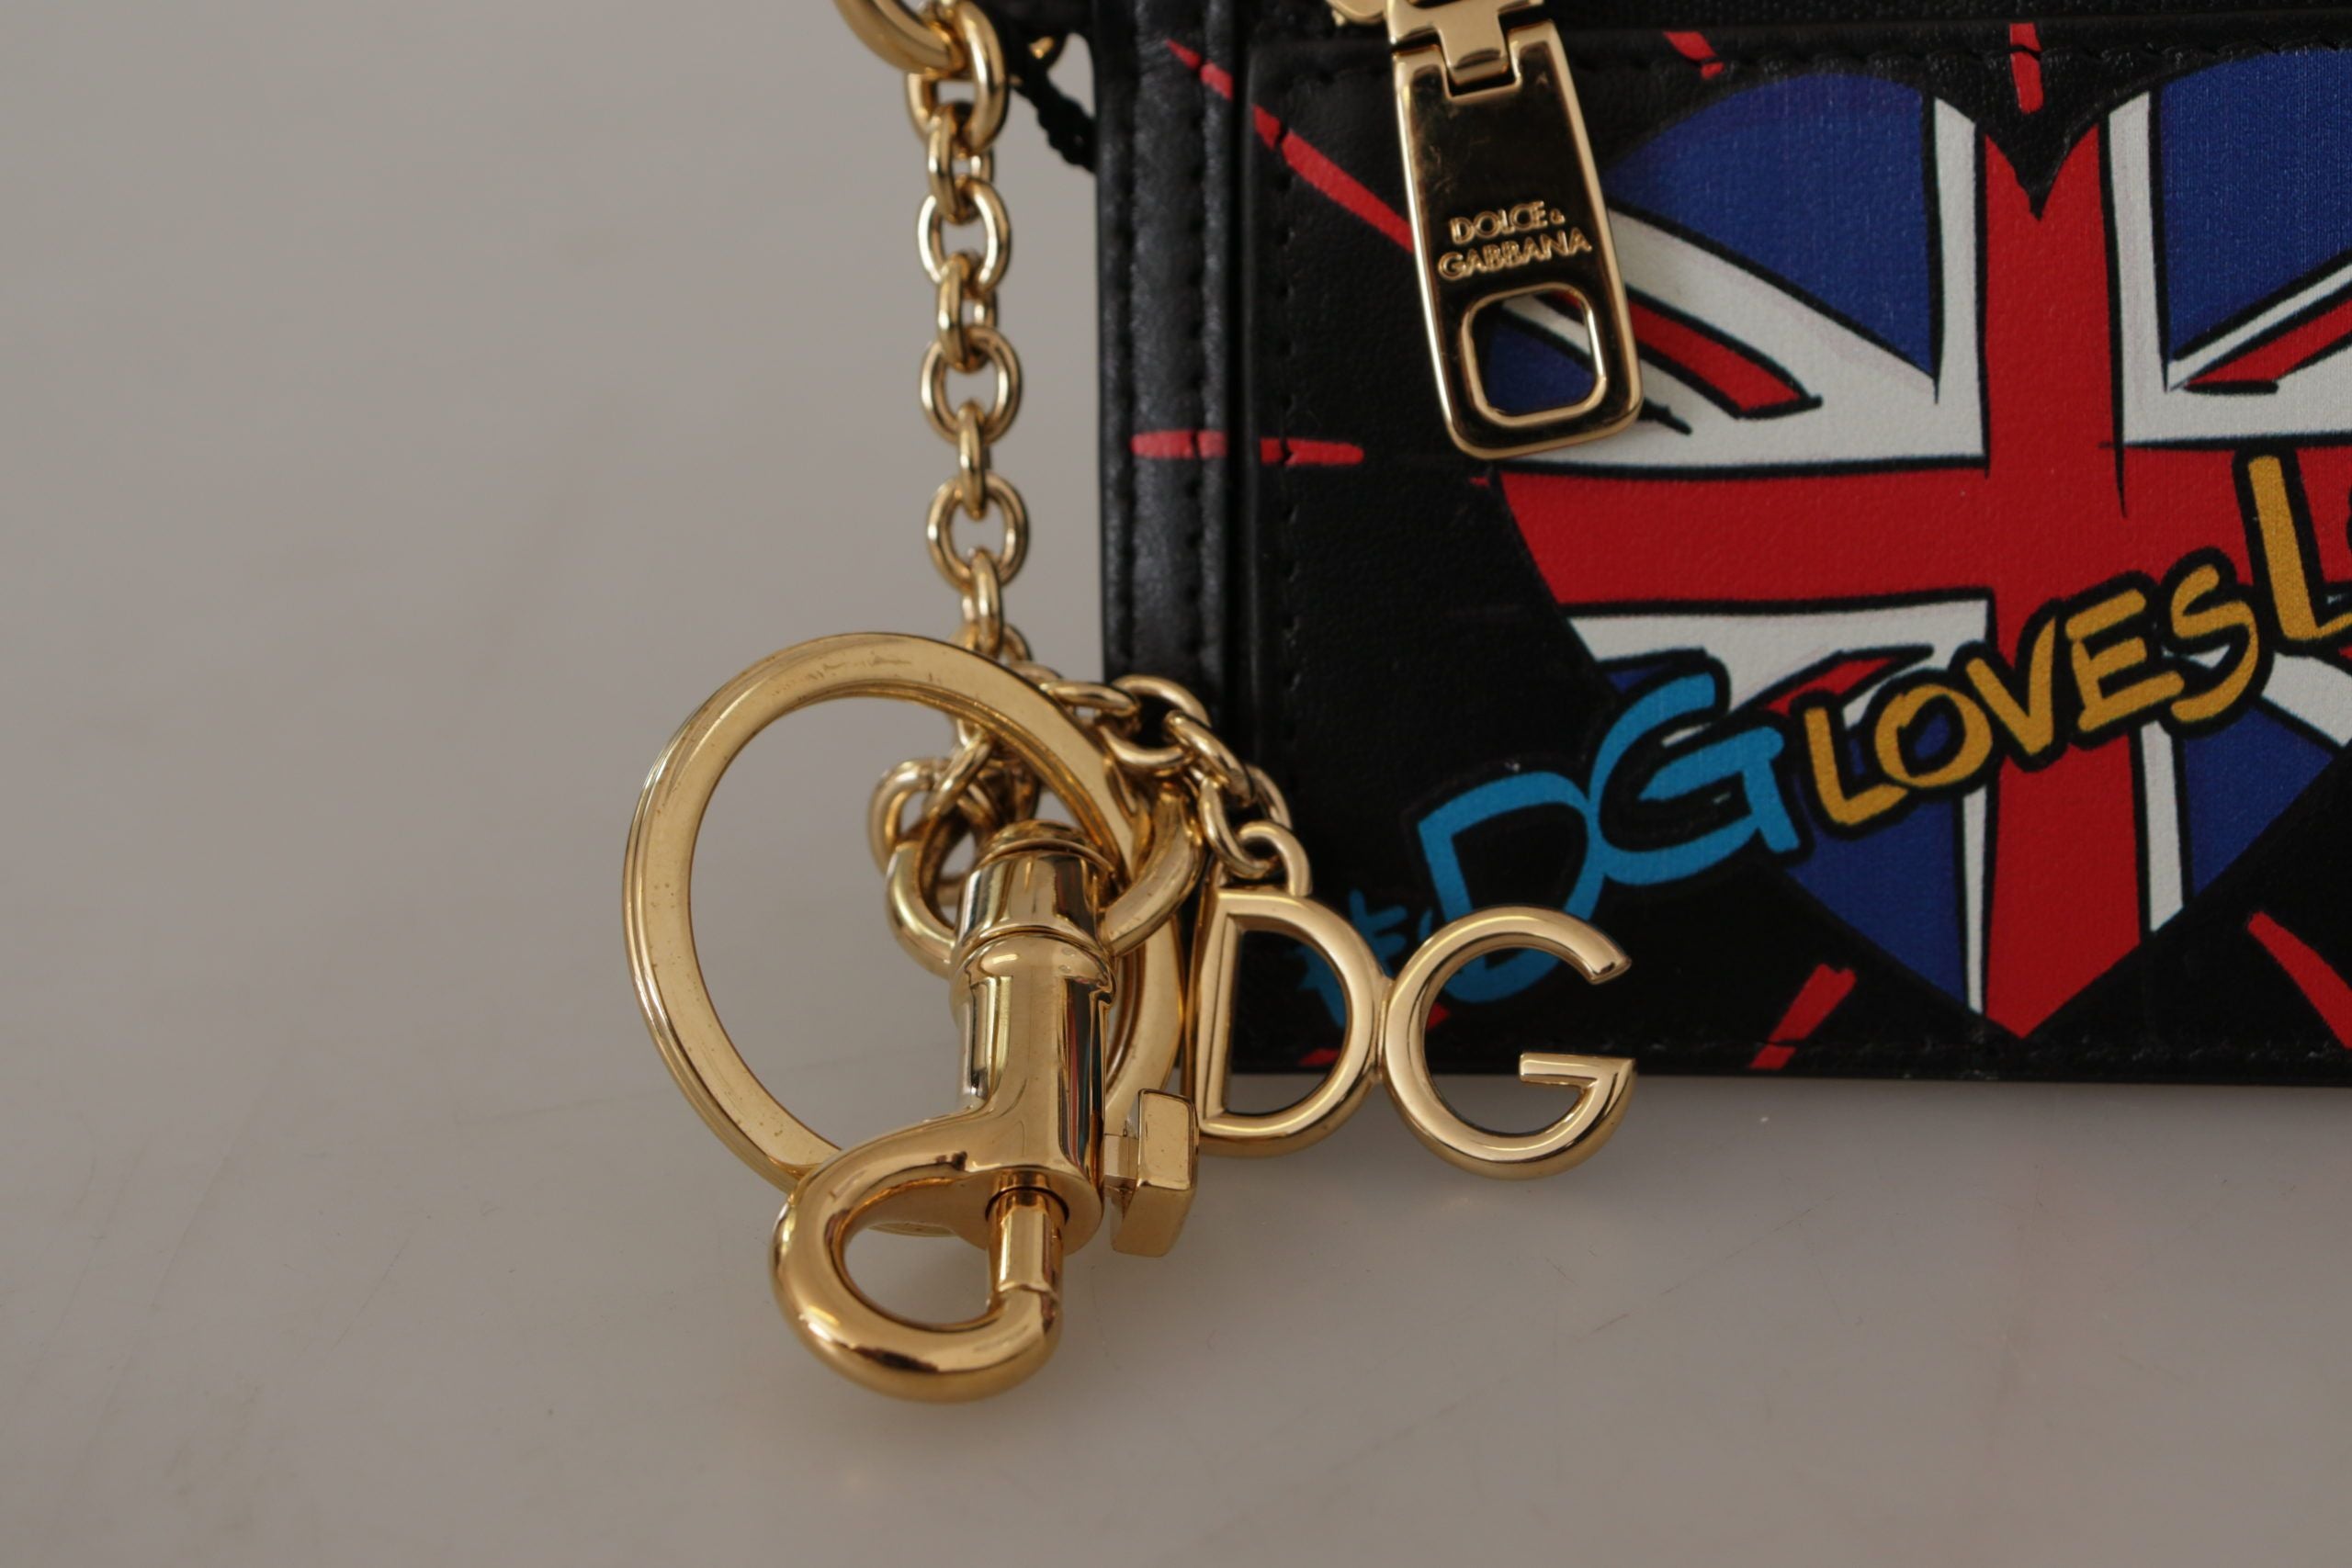 Dolce & Gabbana Elegant Leather Coin Wallet With Keyring